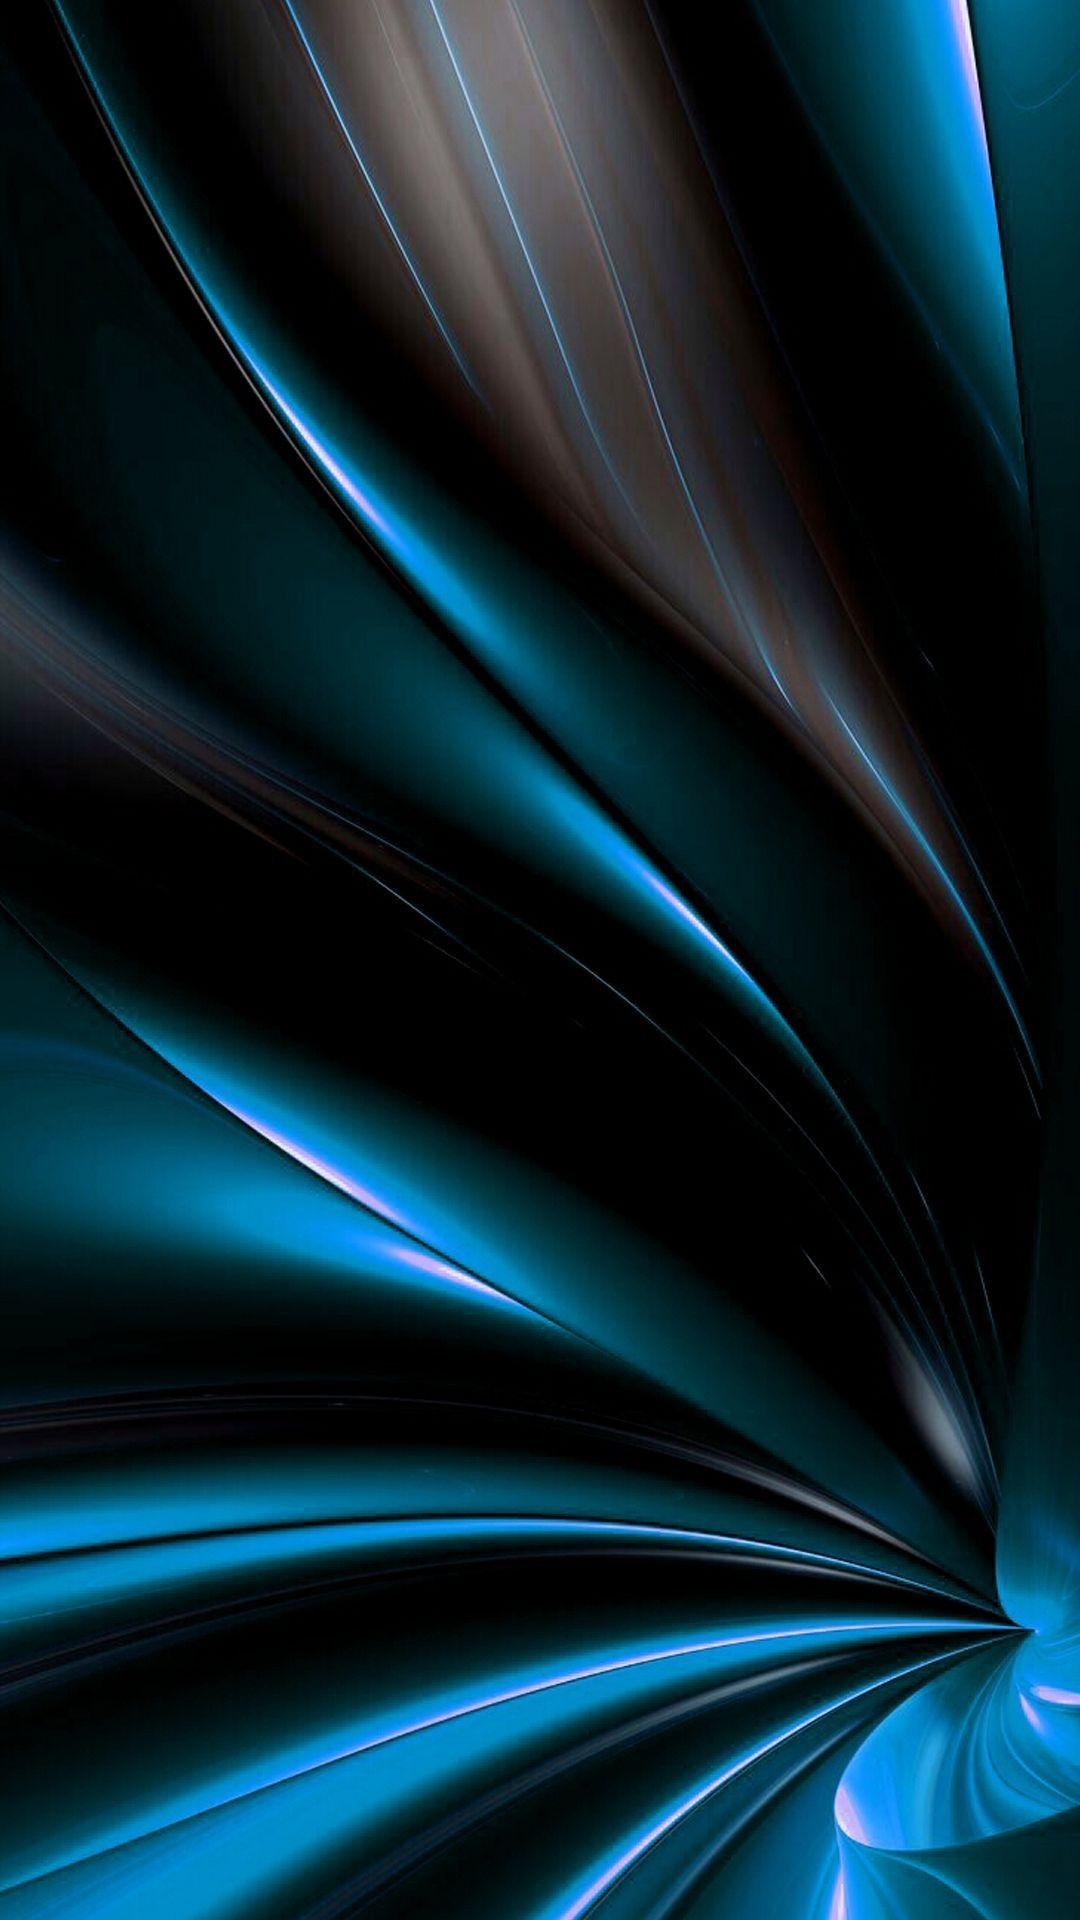 Ultra HD iPhone Wallpapers - Top Free Ultra HD iPhone Backgrounds